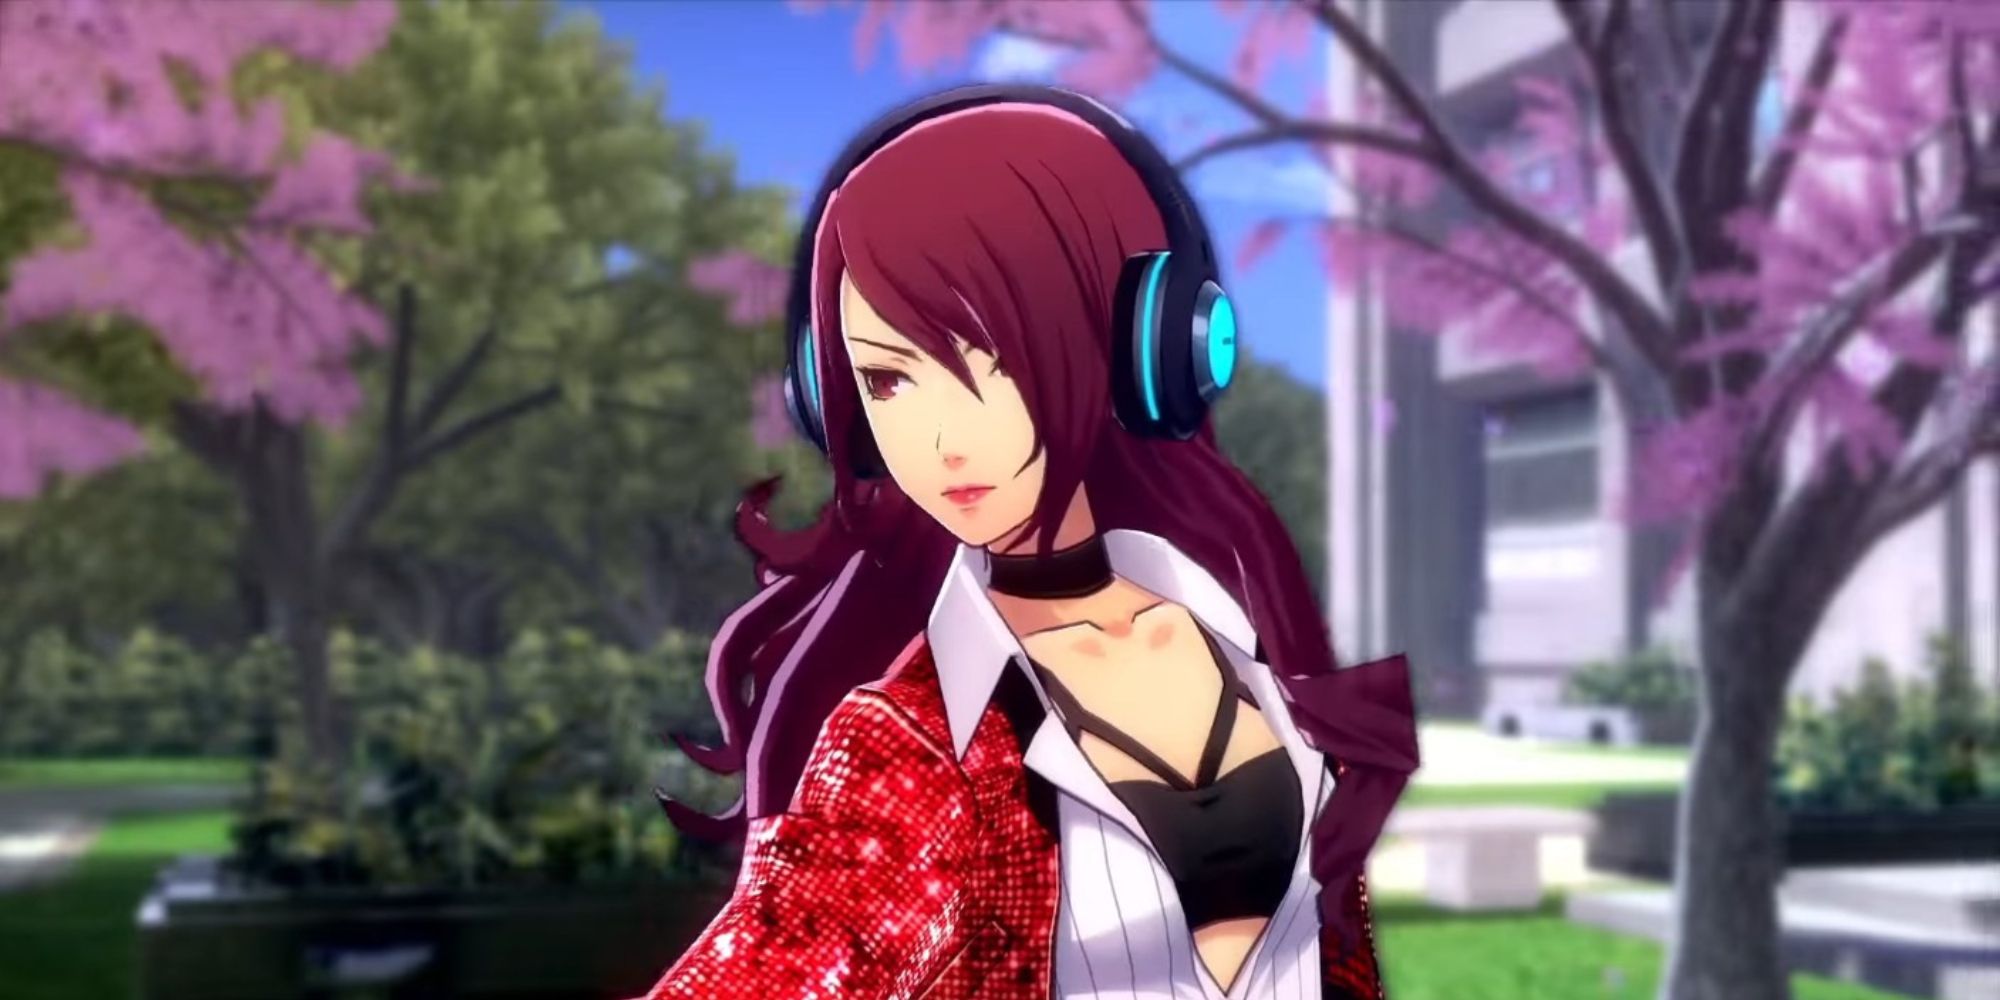 a shot of Mitsuru Kirijo from Persona 3 Dancing In Moonlight wearing headphones against a backdrop of cherry blossom trees and a school building